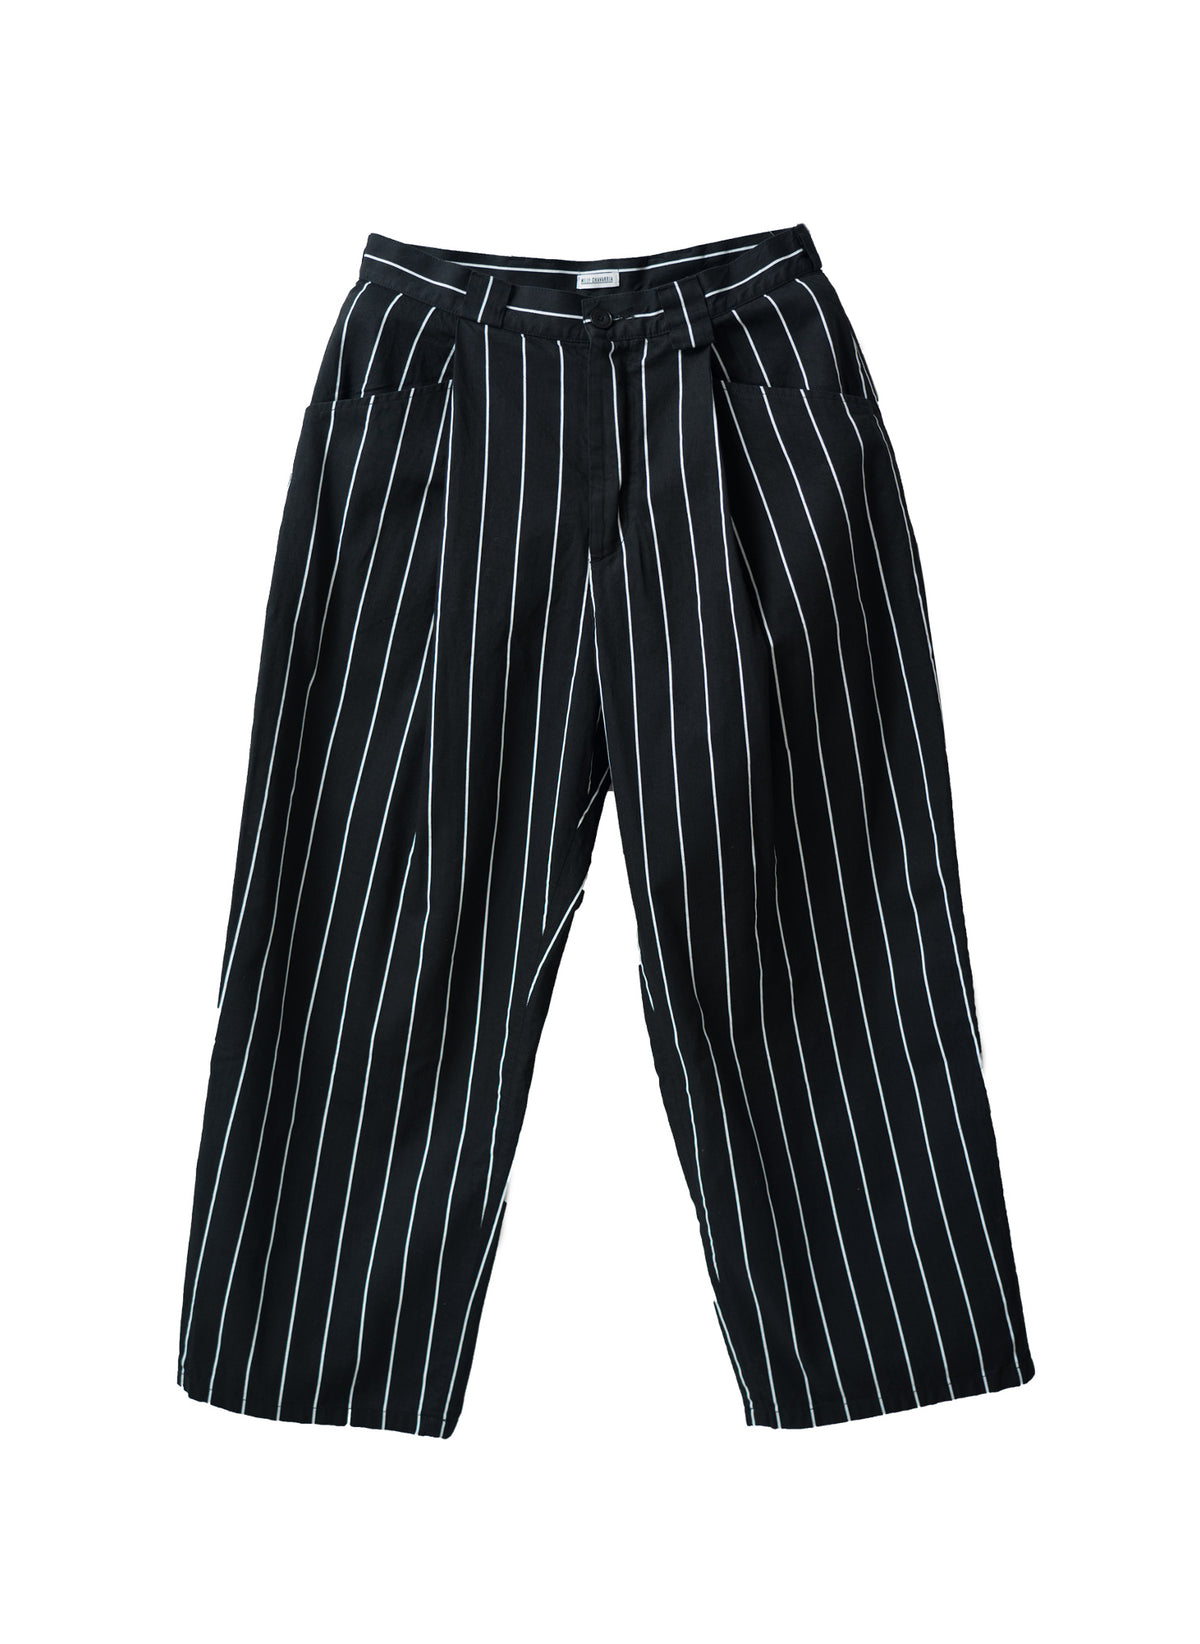 <span style="color: #f50b0b;">Last One</span> WILLY CHAVARRIA / GONZALES TROUSER BLACK